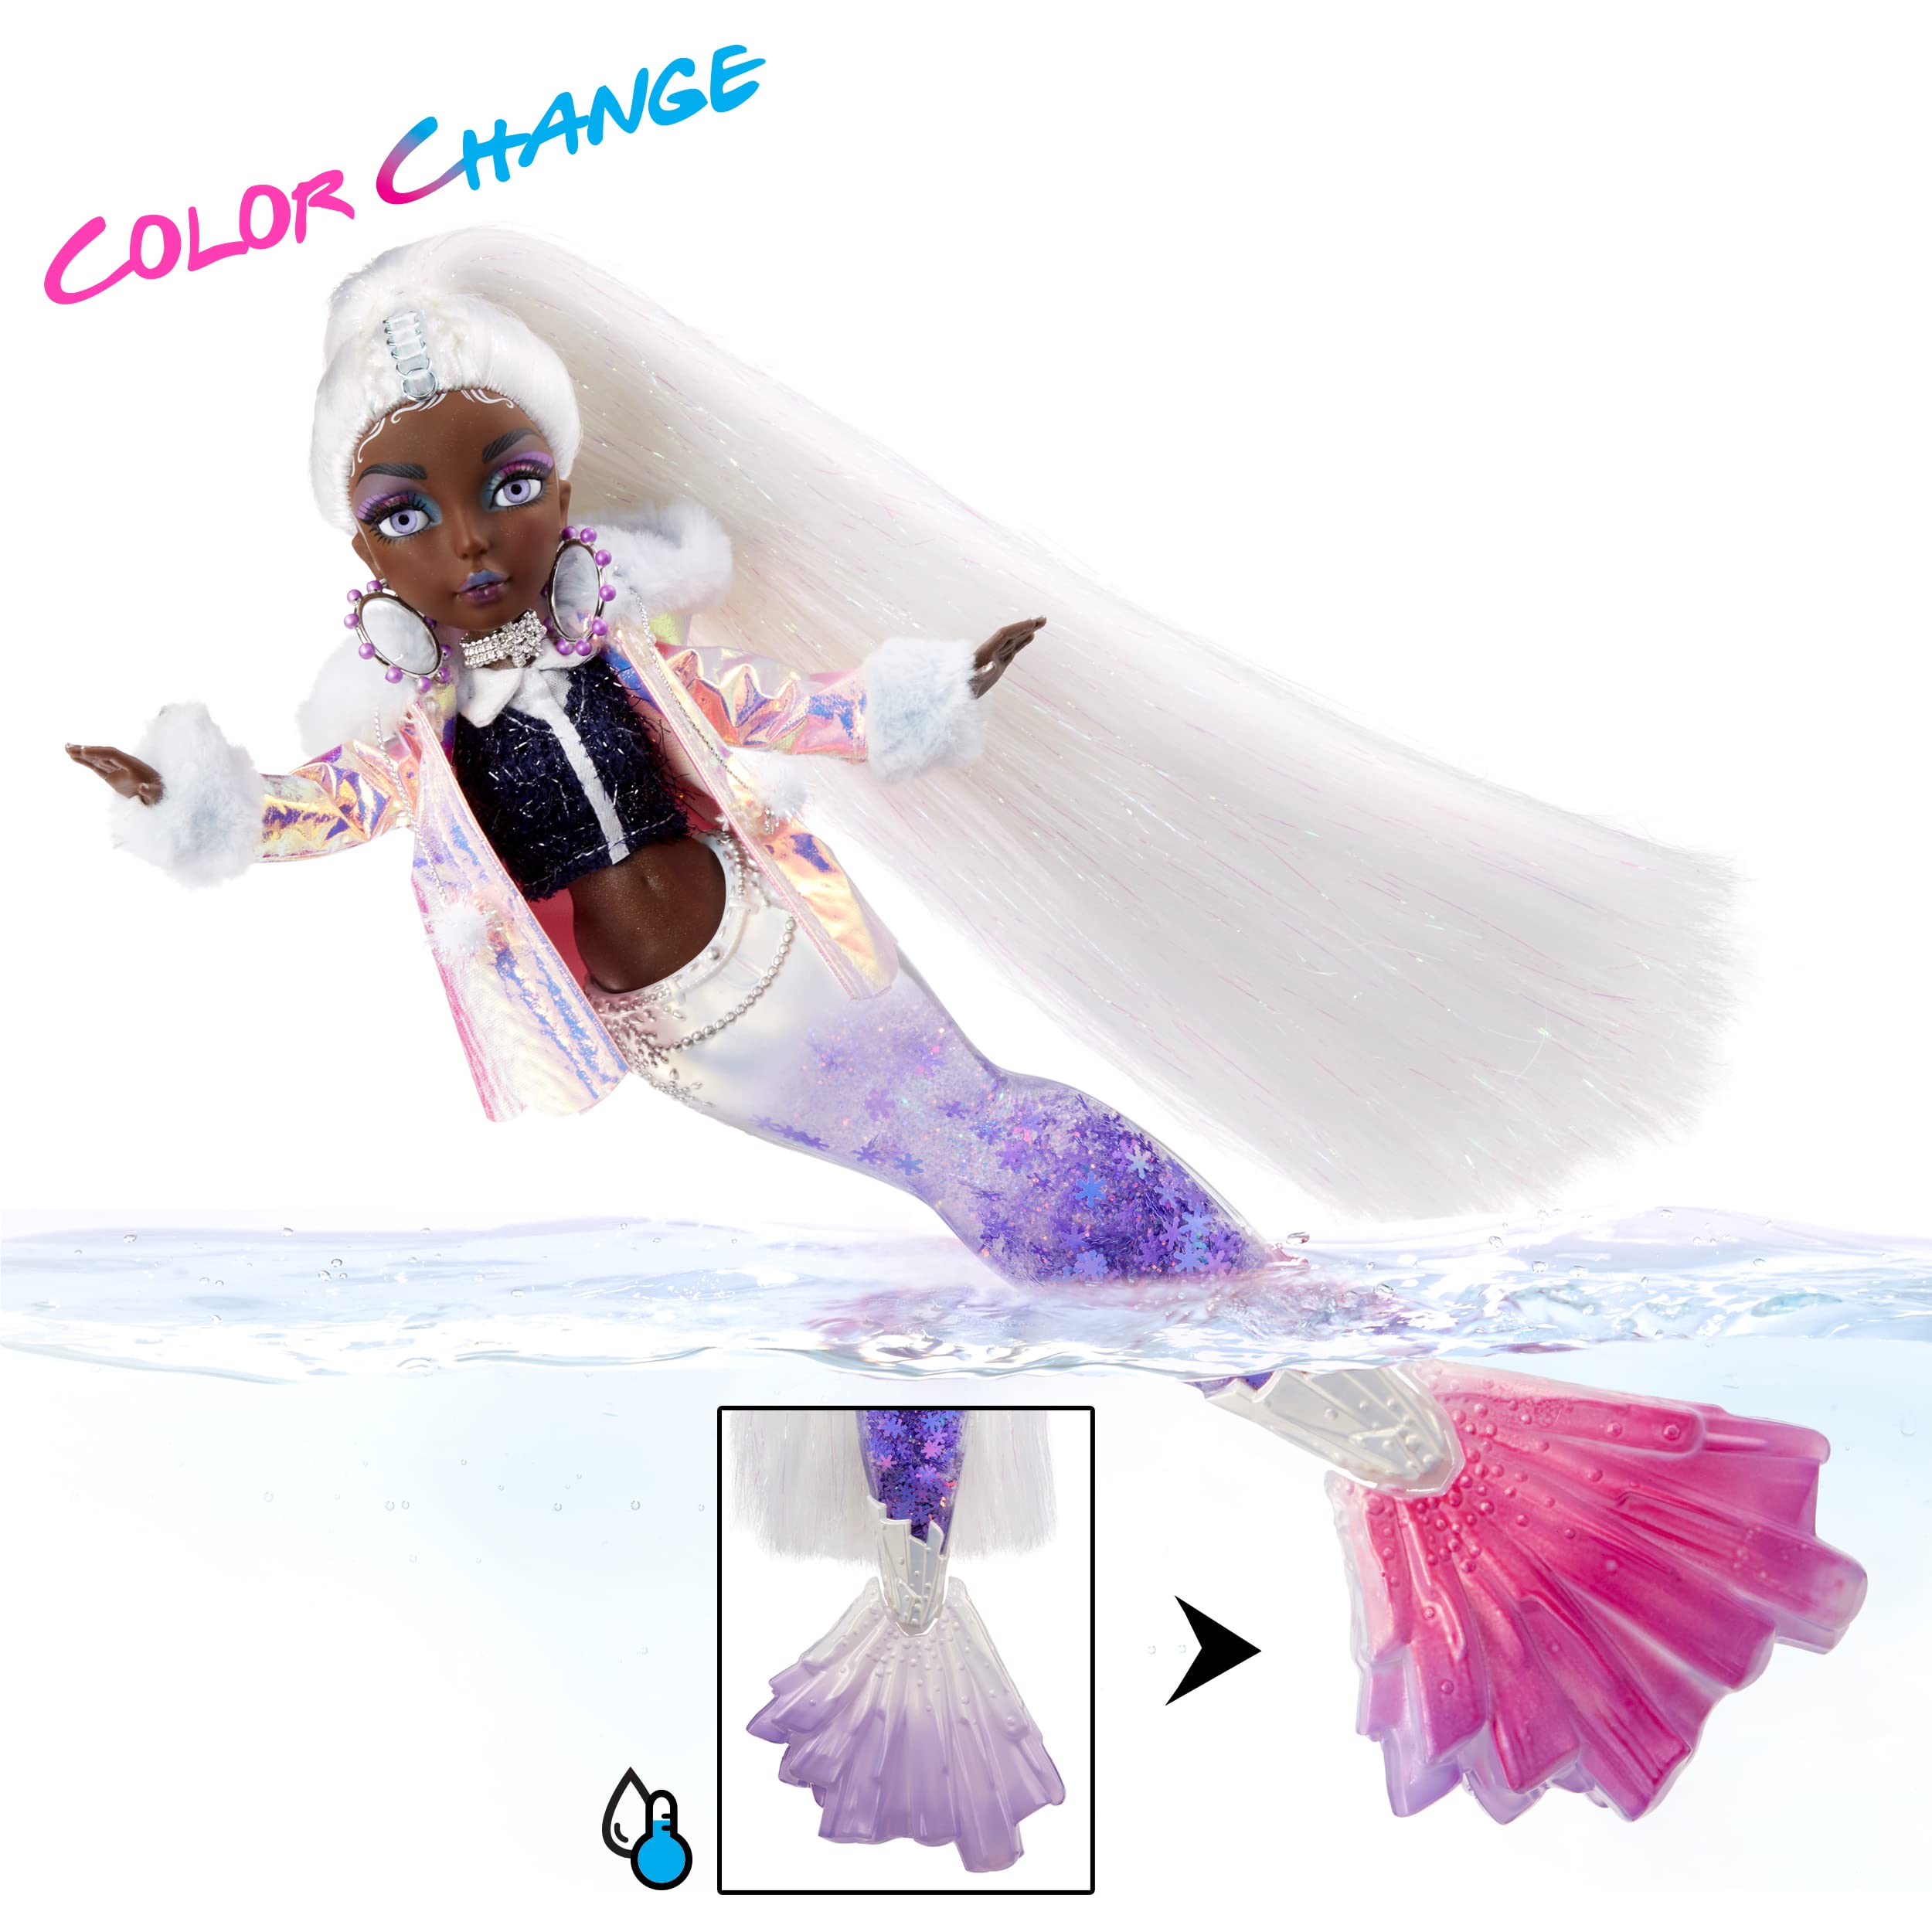 MERMAZE MERMAIDZ™ Winter Waves Crystabella™ Mermaid Fashion Doll with Color Change Fin, Glitter-Filled Tail and Accessories